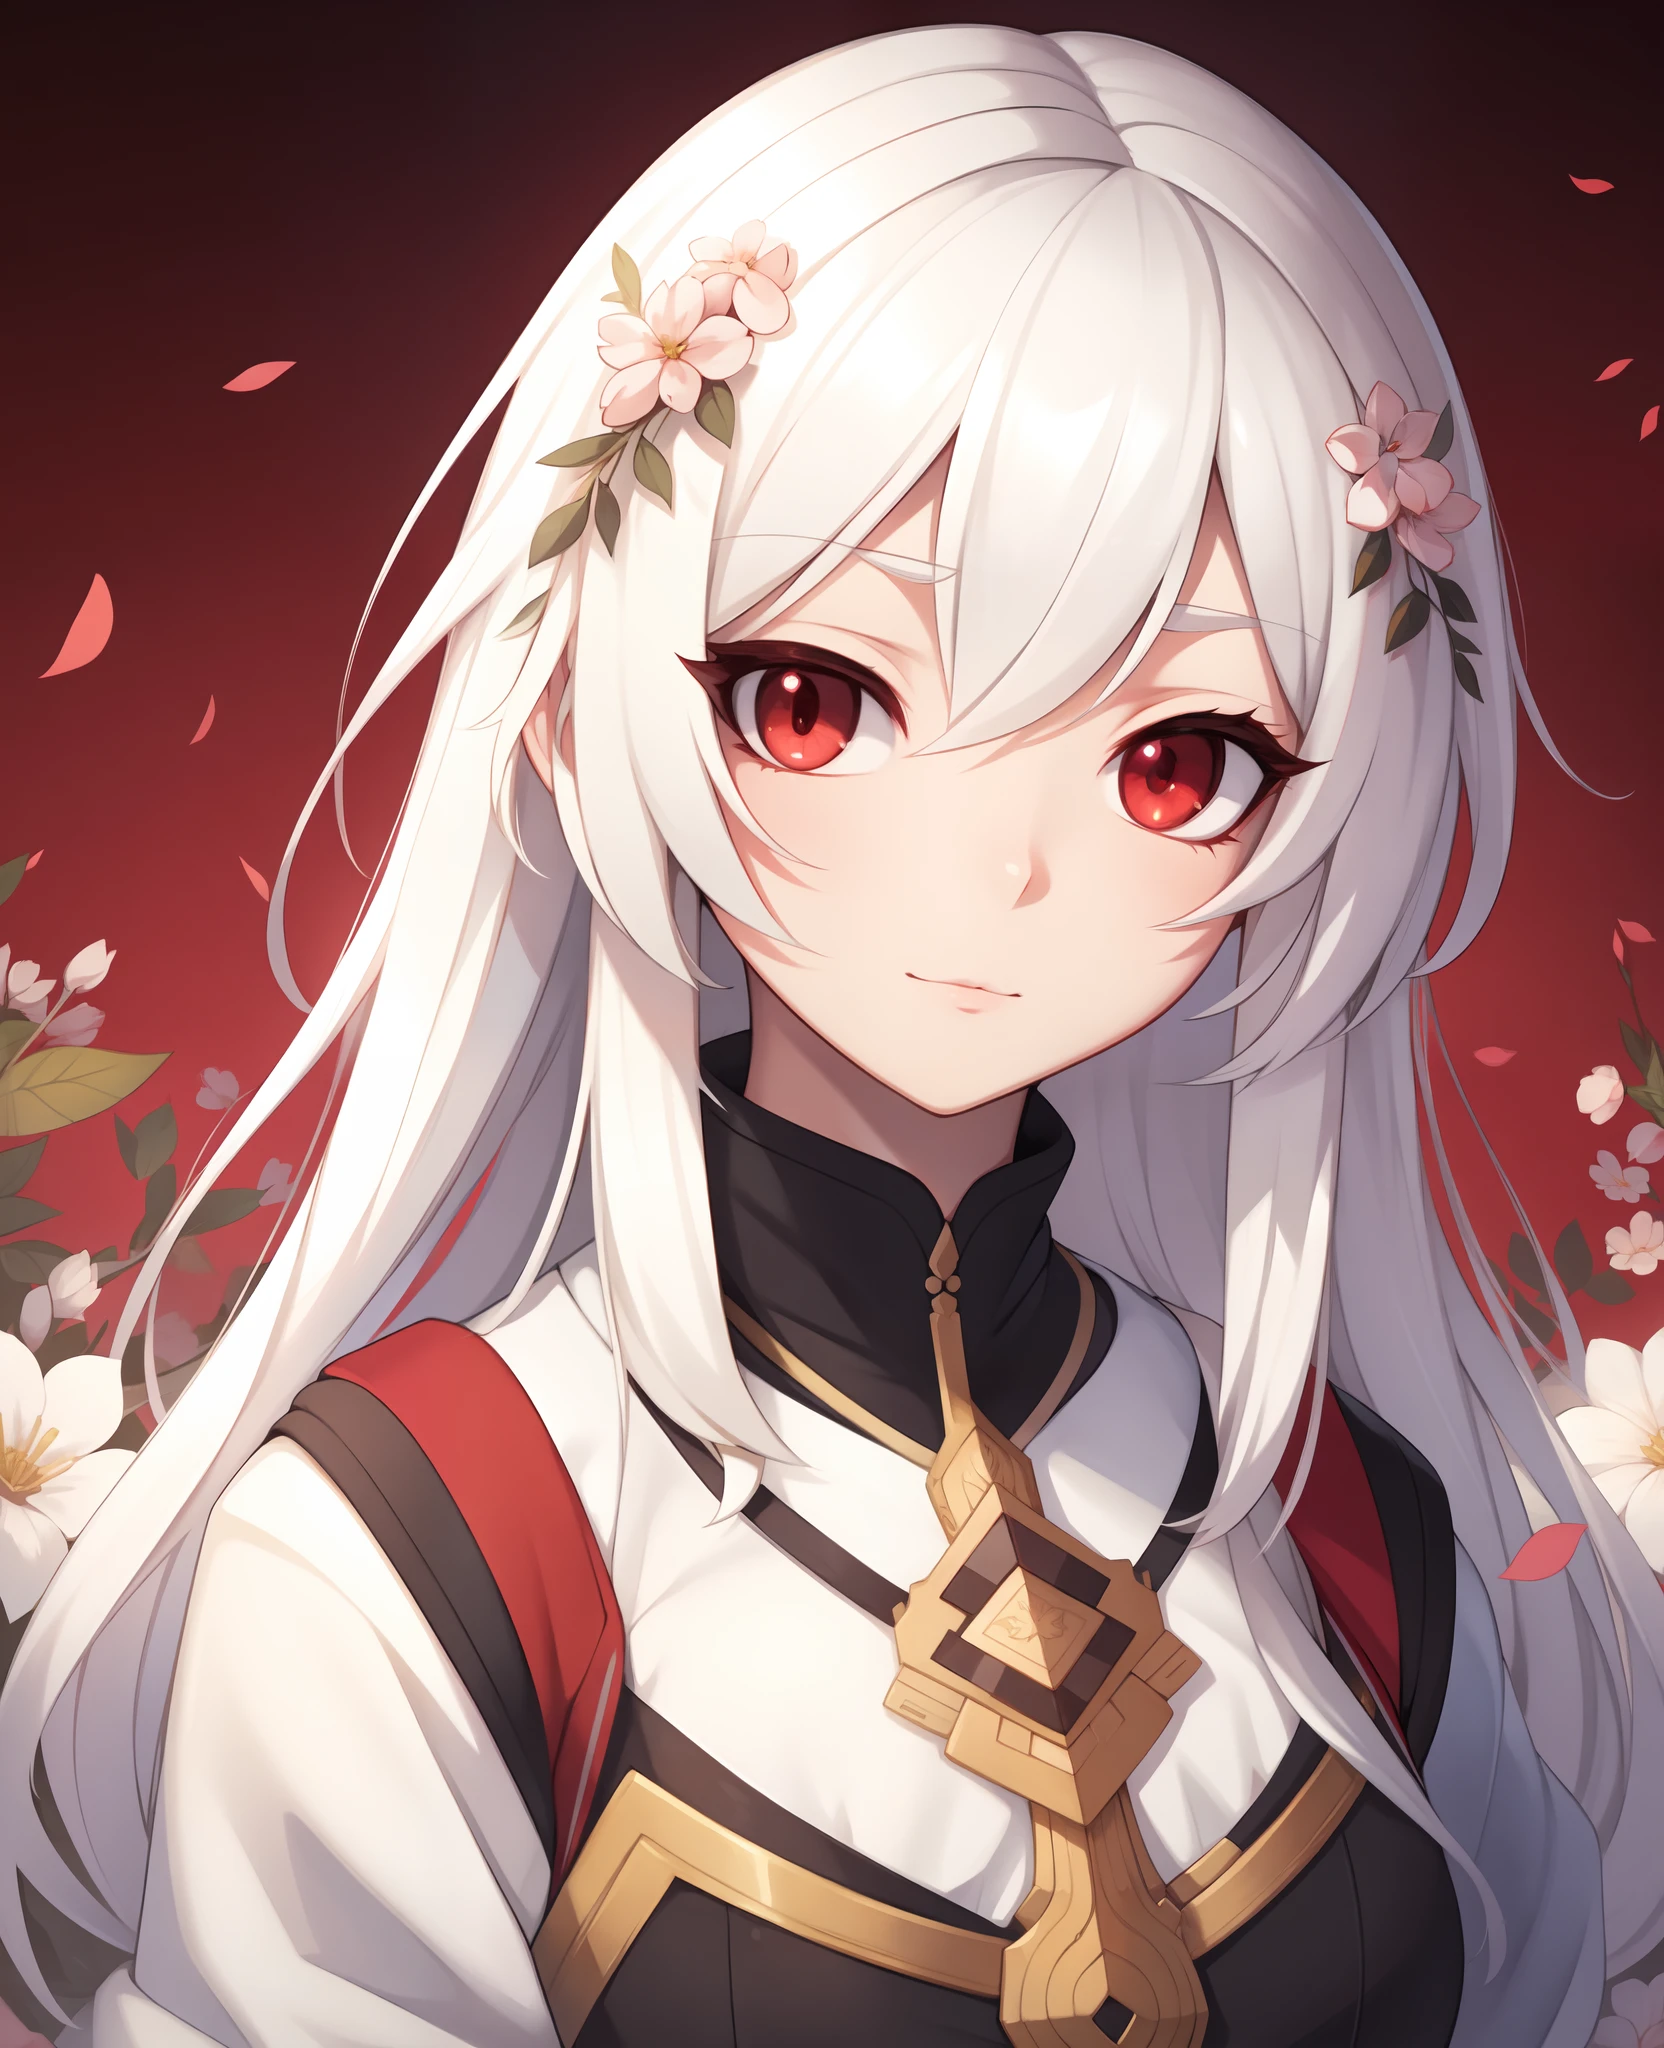 Anime - a painting in the style of a woman with white hair and flowers, Guviz, Guweiz in Pixiv ArtStation, Guviz-style artwork, guweiz masterpiece, Guweiz on ArtStation Pixiv, Detailed digital anime art, Digital art on Pixiv, trending on artstation pixiv, White-haired god，with short white hair，red color eyes